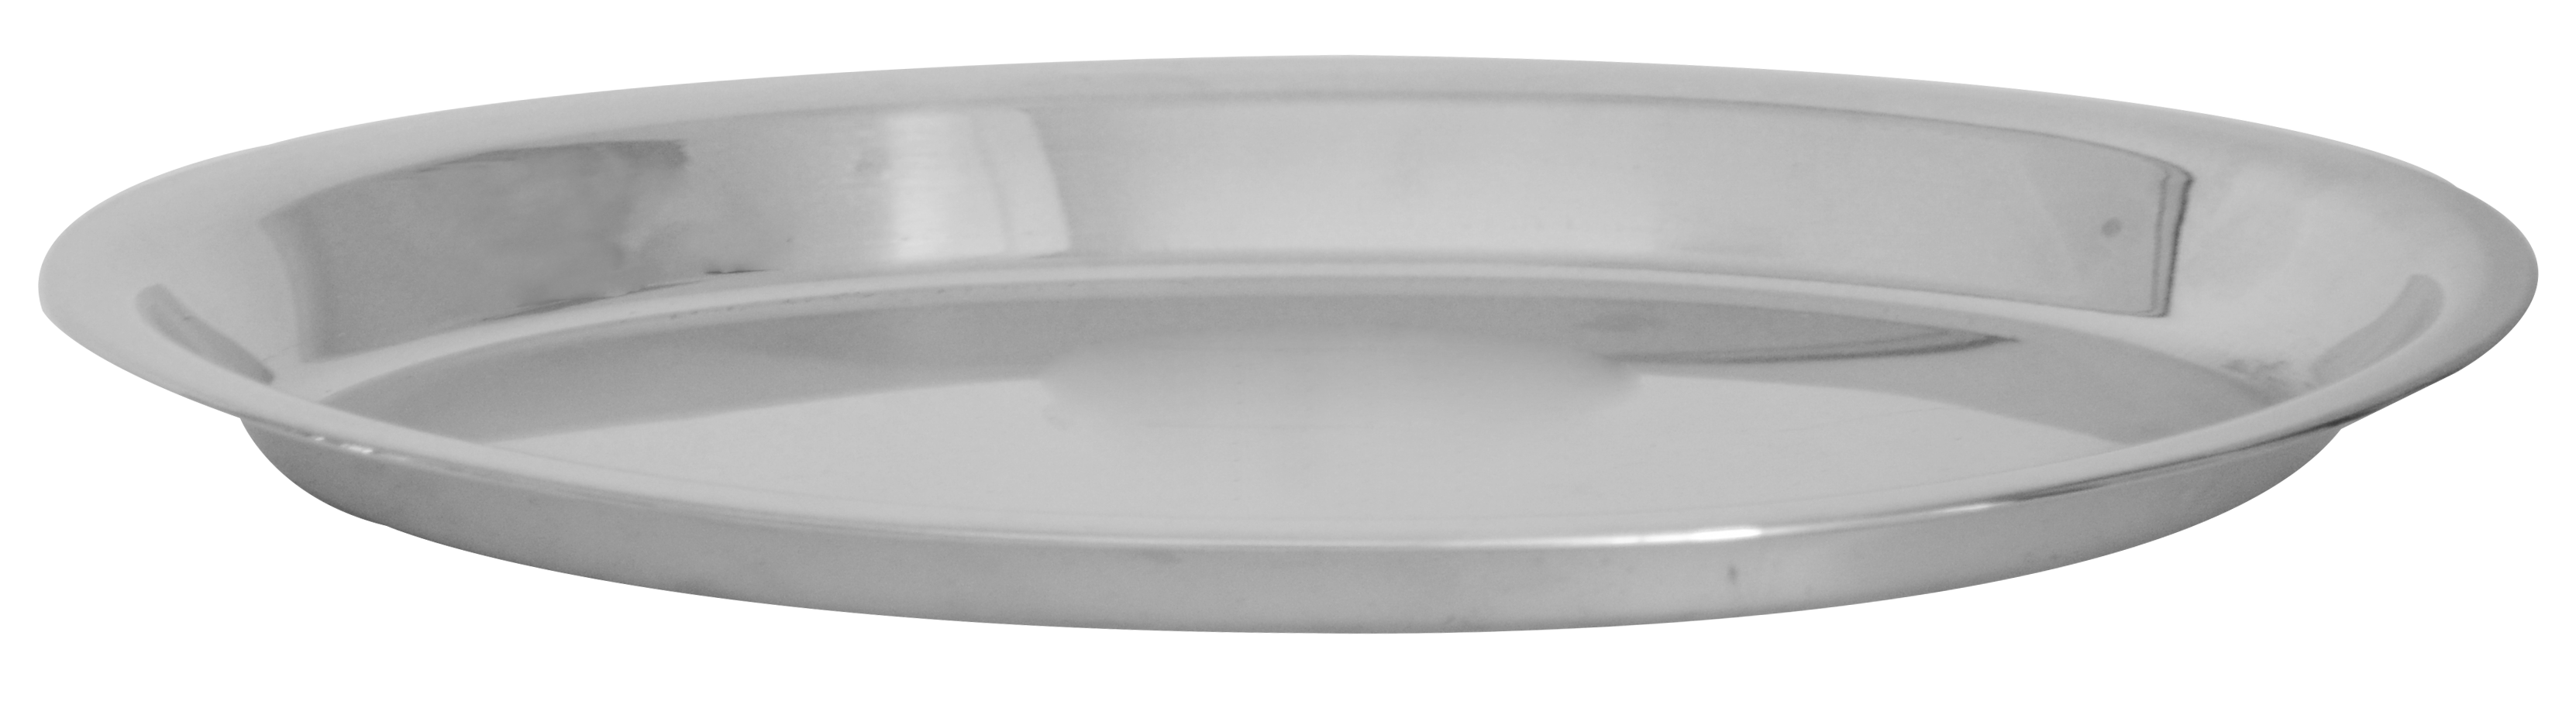 Stainless Steel Egg- Shaped Pan